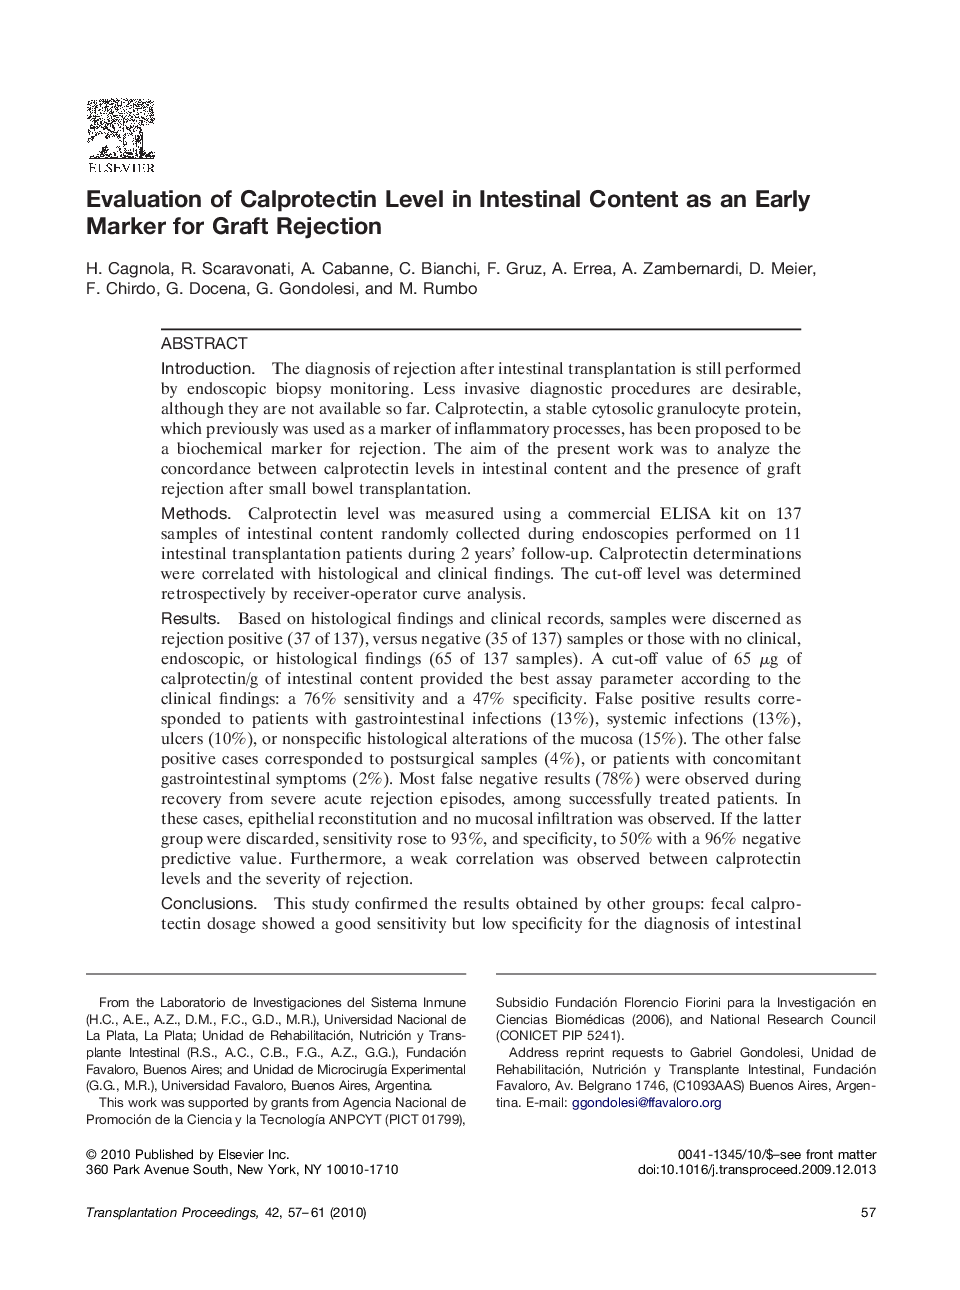 Evaluation of Calprotectin Level in Intestinal Content as an Early Marker for Graft Rejection 